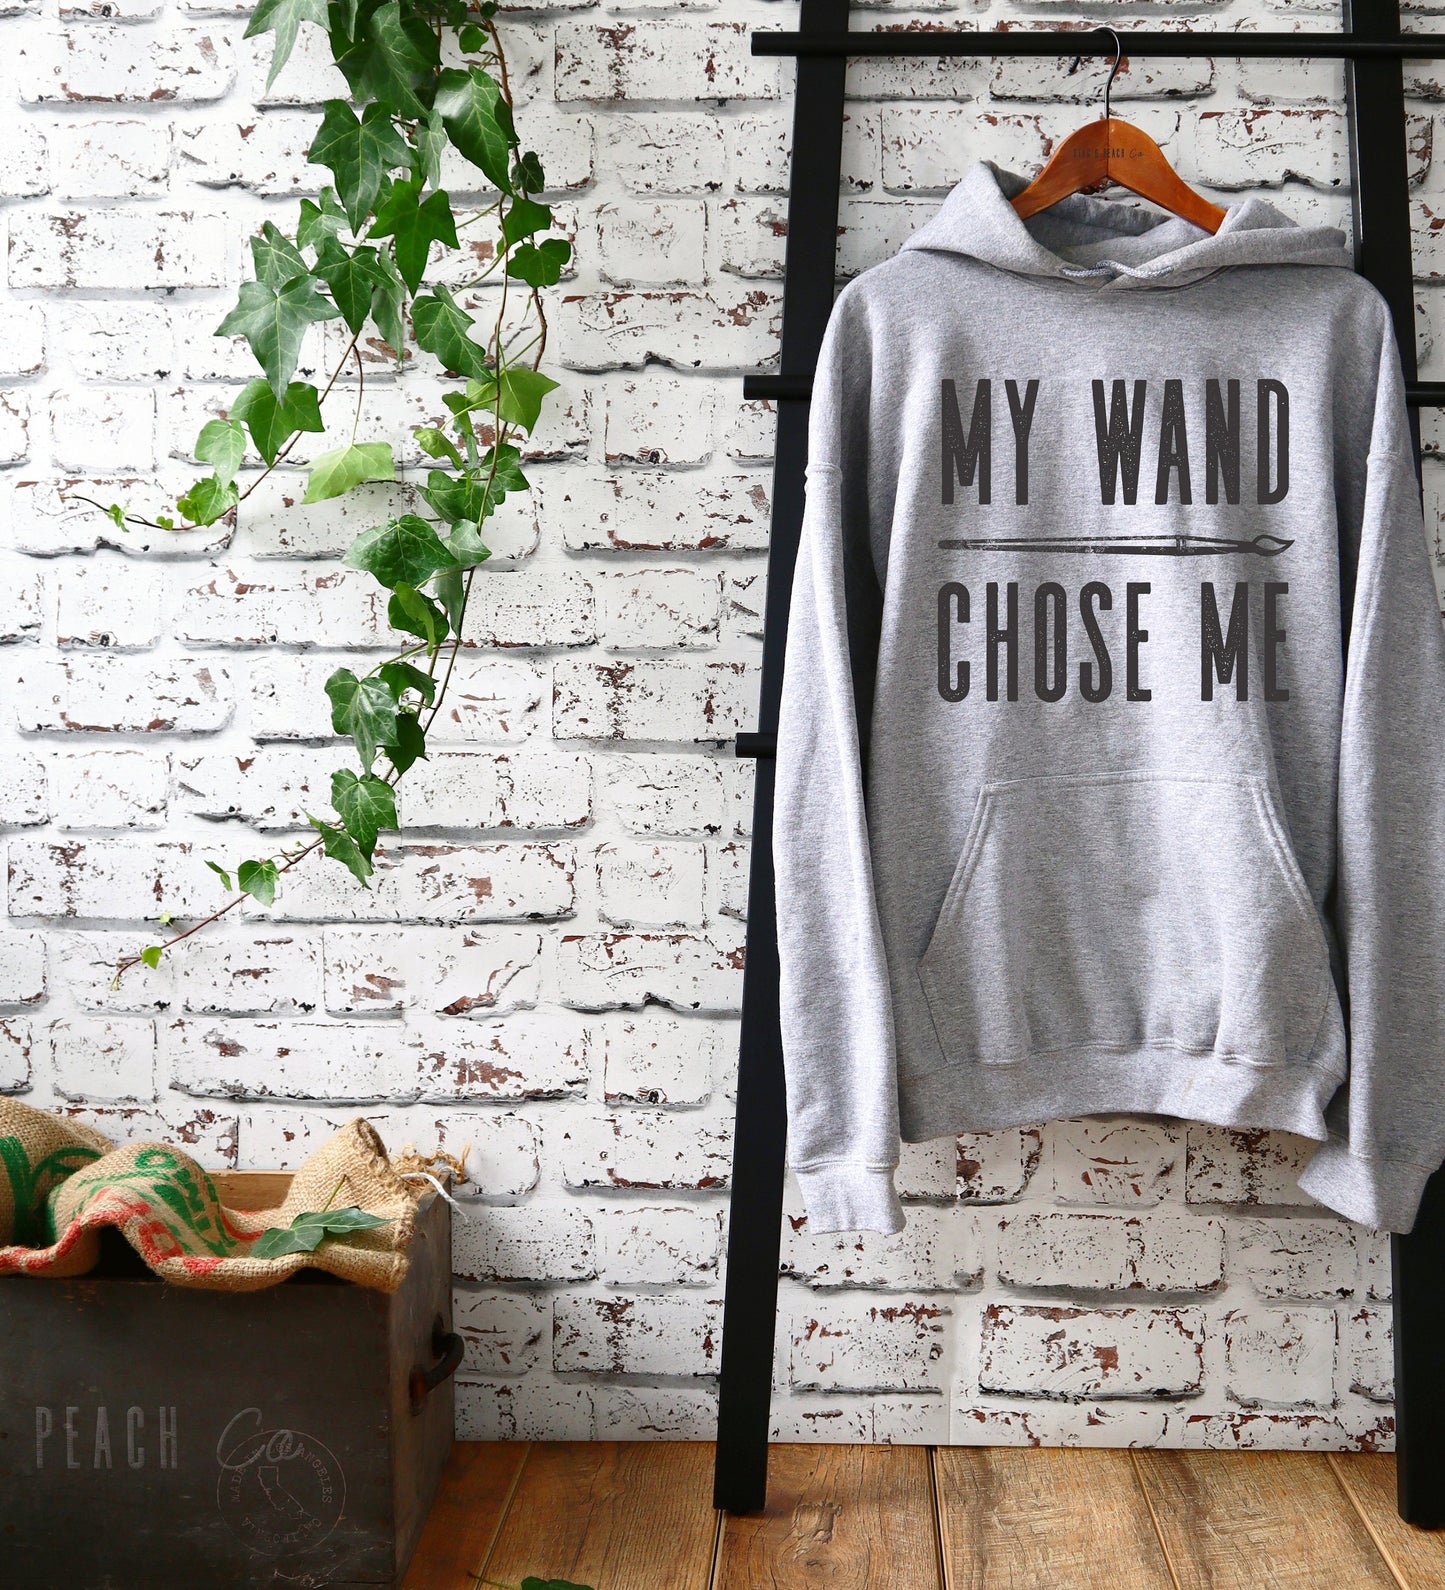 My Wand (Paintbrush) Chose Me Hoodie - Artist shirt, Artist gift, Art Teacher Shirt, Painter Shirt, Graffiti artist, Gift for painter